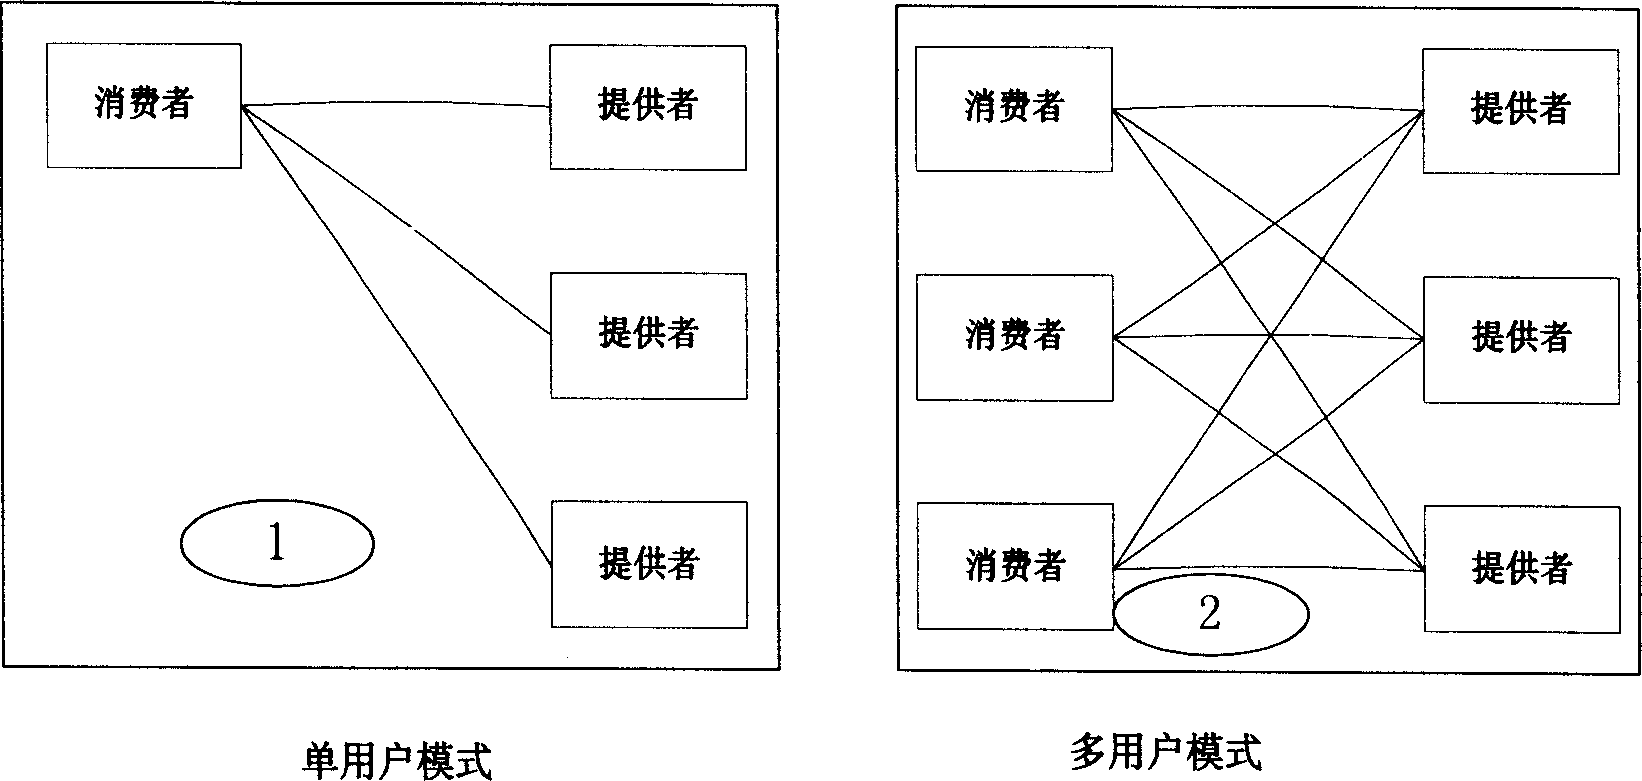 Media issuing system and method